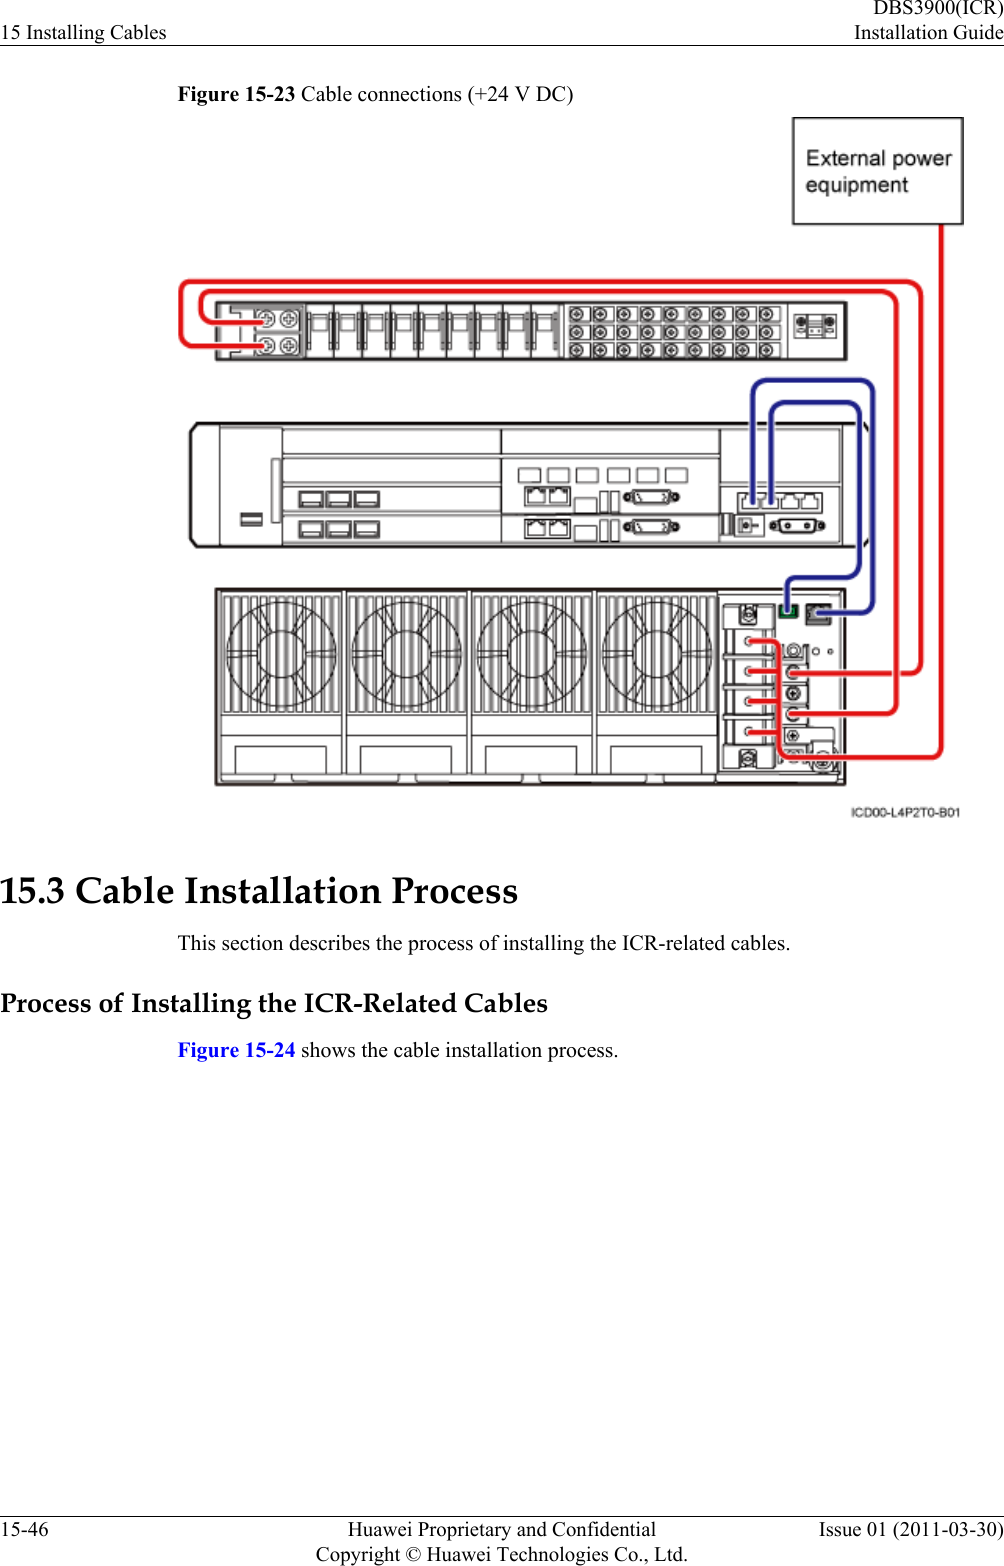 Figure 15-23 Cable connections (+24 V DC)15.3 Cable Installation ProcessThis section describes the process of installing the ICR-related cables.Process of Installing the ICR-Related CablesFigure 15-24 shows the cable installation process.15 Installing CablesDBS3900(ICR)Installation Guide15-46 Huawei Proprietary and ConfidentialCopyright © Huawei Technologies Co., Ltd.Issue 01 (2011-03-30)